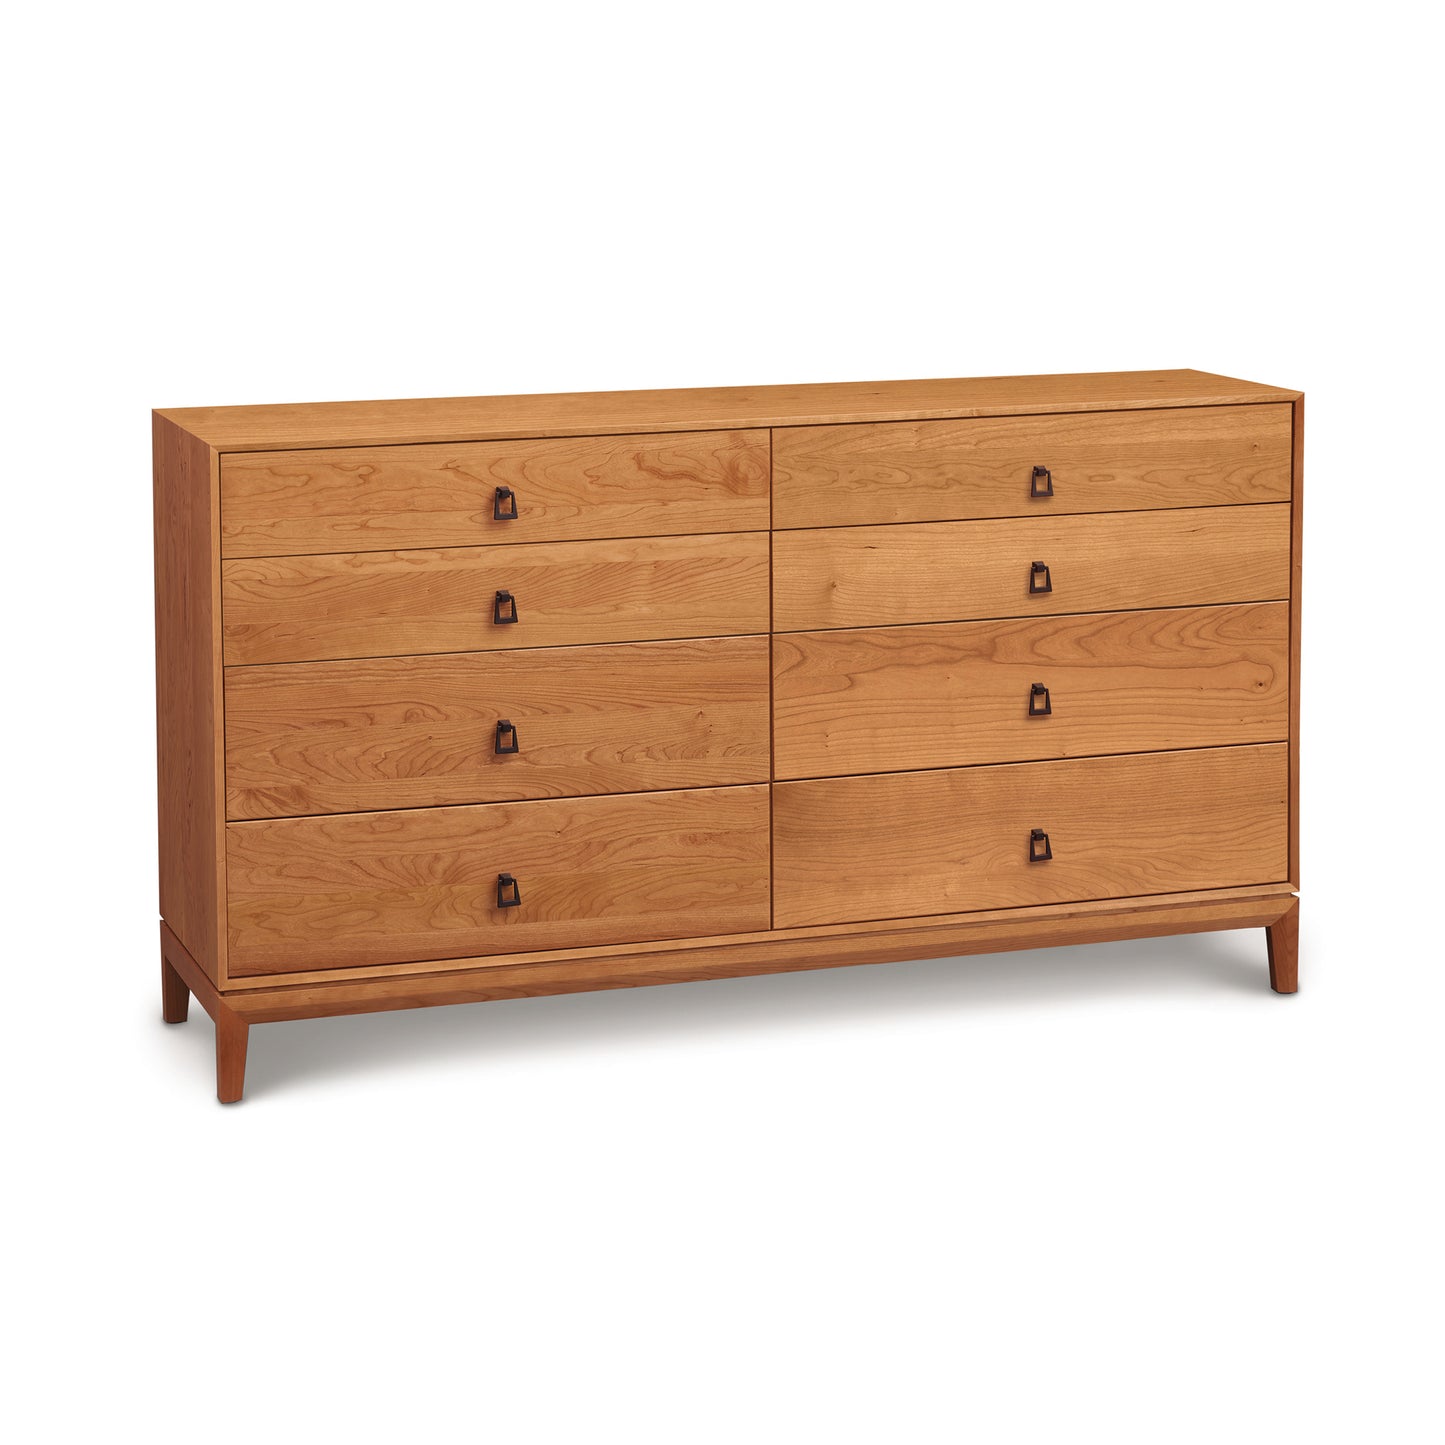 A Mansfield 8-Drawer Dresser from Copeland Furniture with simple handles and a minimalist design.